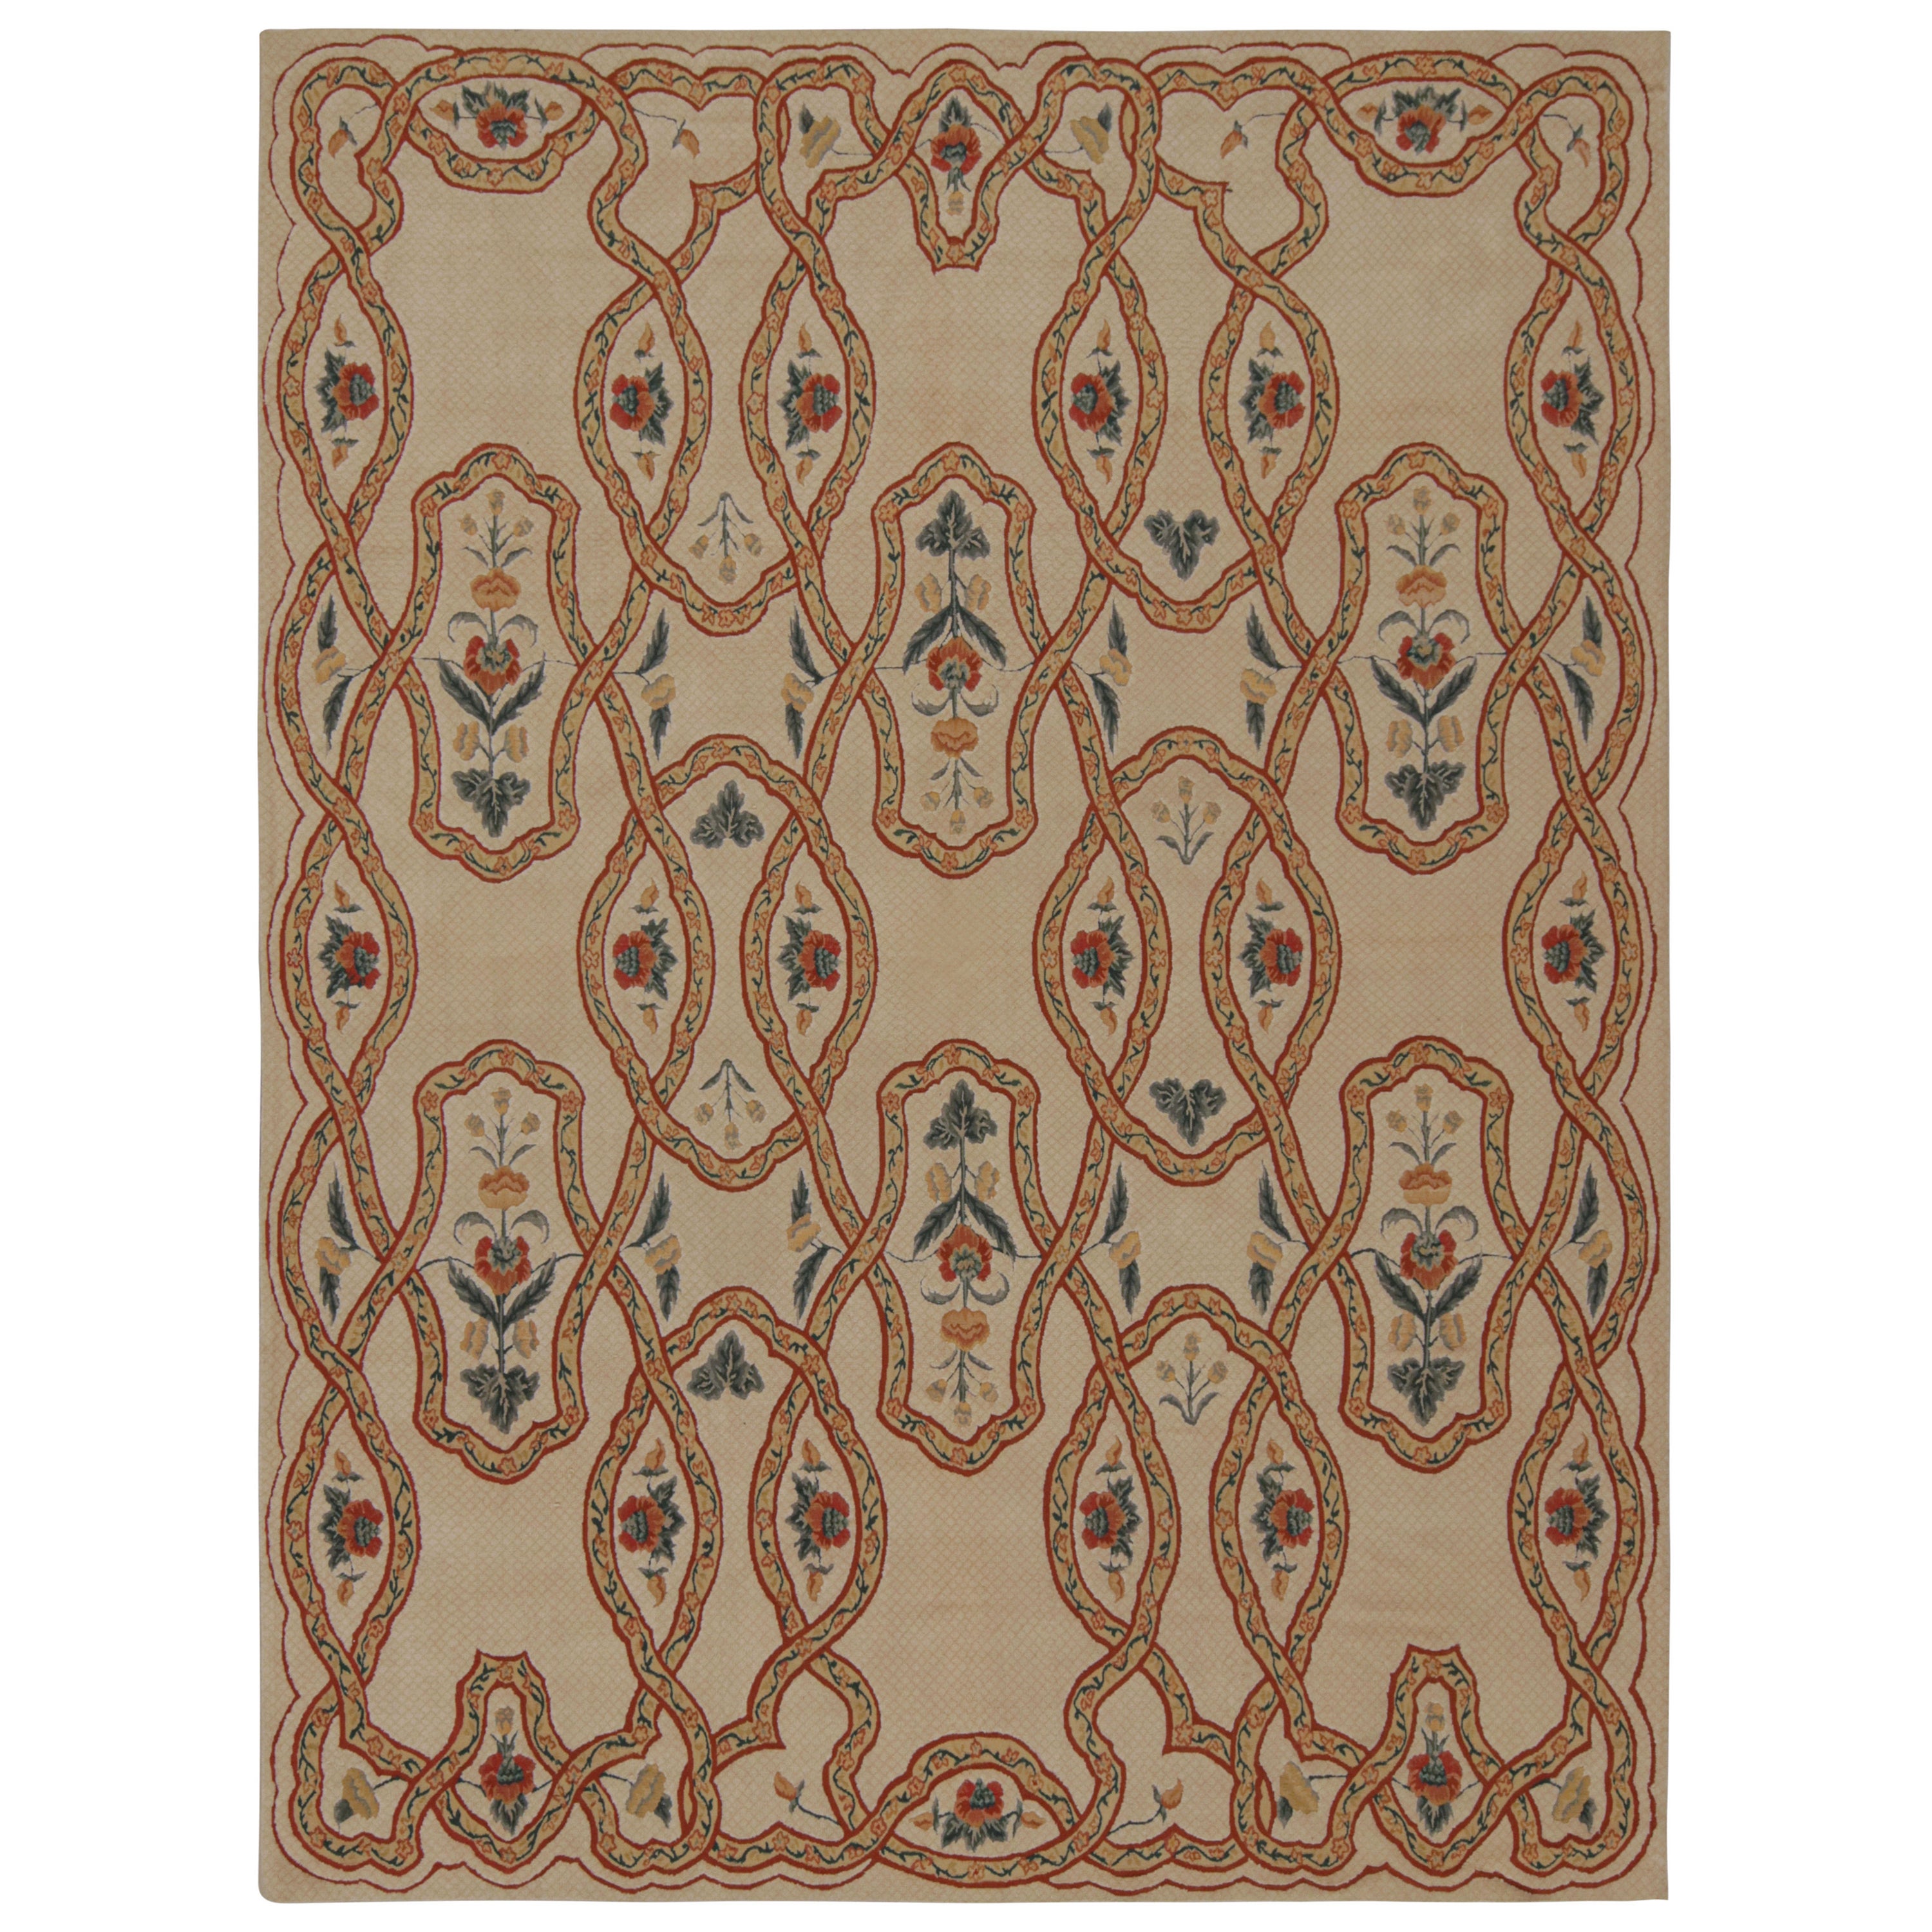 Rug & kilim’s European Rug in Beige, with Green and Red Floral Patterns For Sale